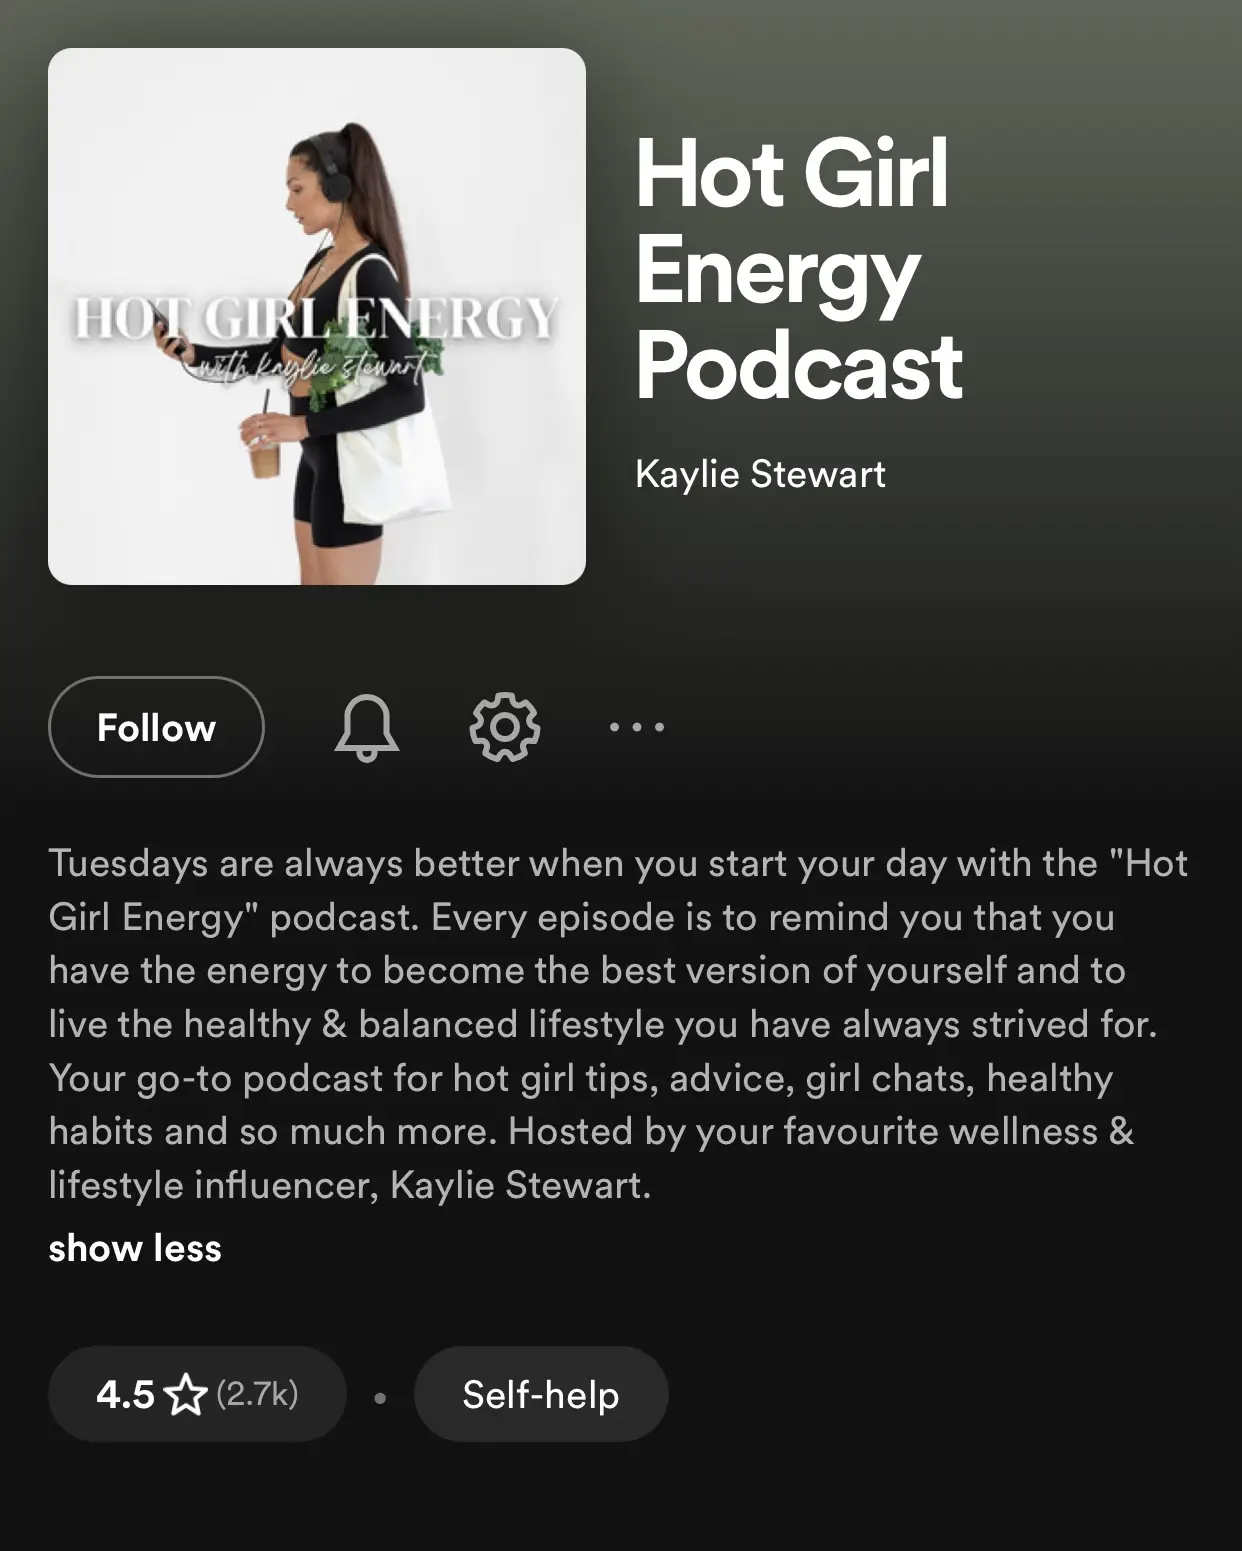  A podcast cover with a woman on it.